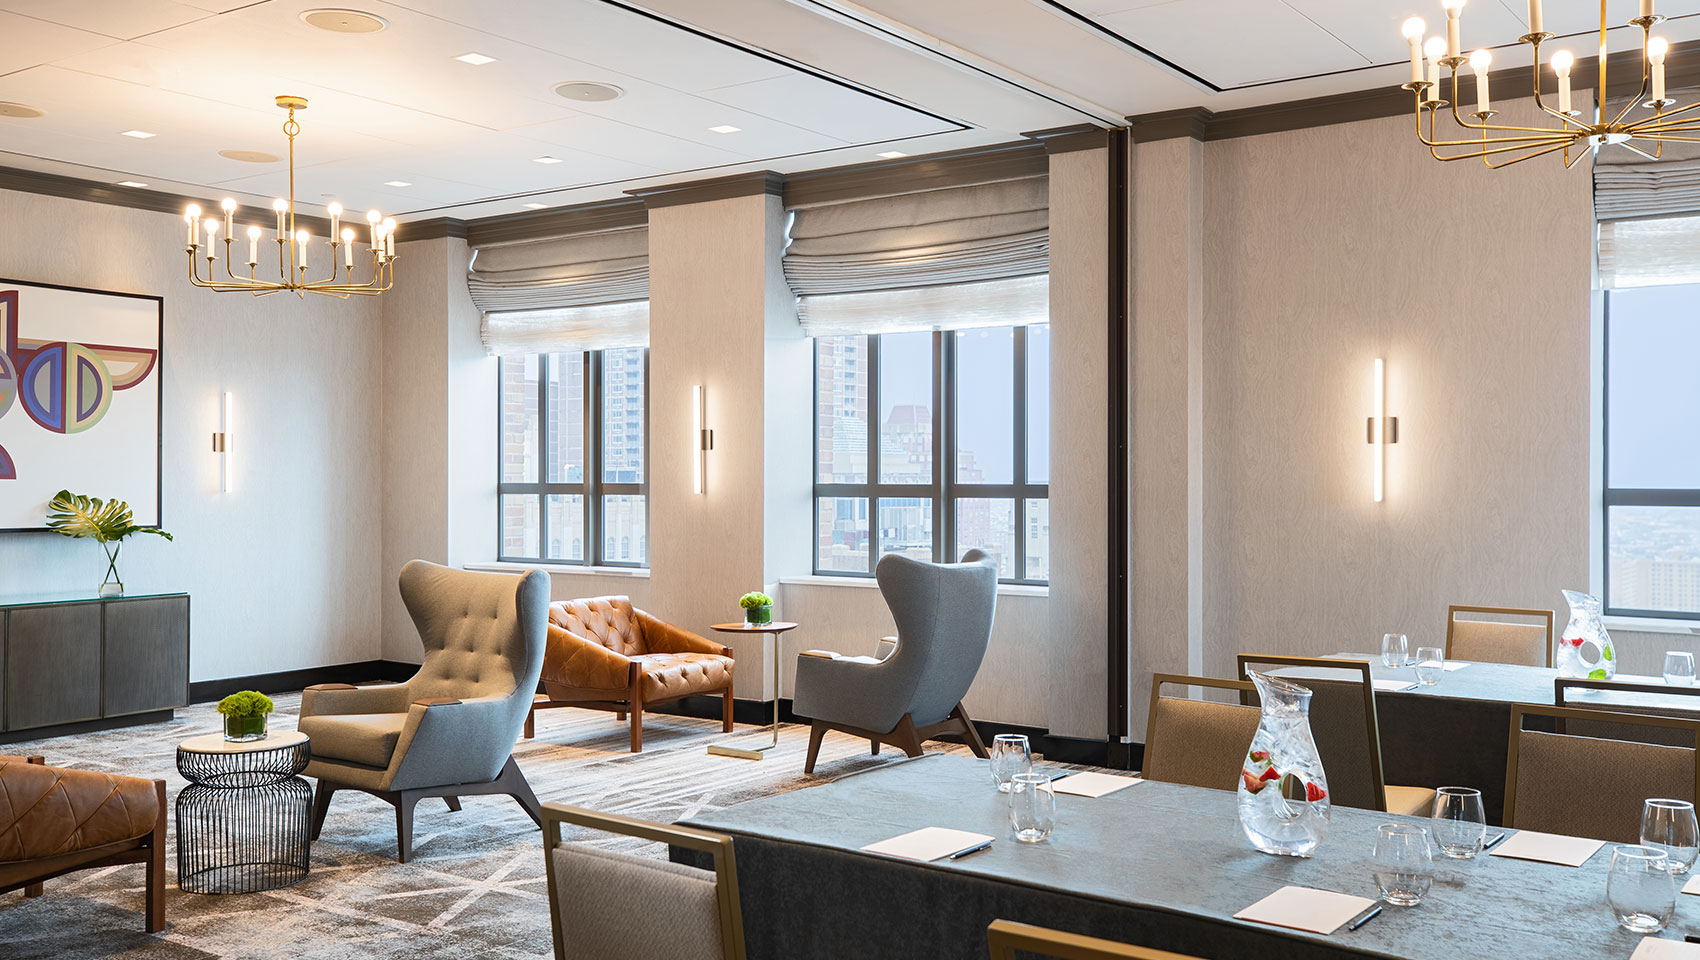 Cret room at Kimpton Hotel Palomar Philadelphia in a brainstorm set up with a long table with notepads to one side and comfortable face-to-face chairs on the other, all encompassed within a room with multiple large windows and city views